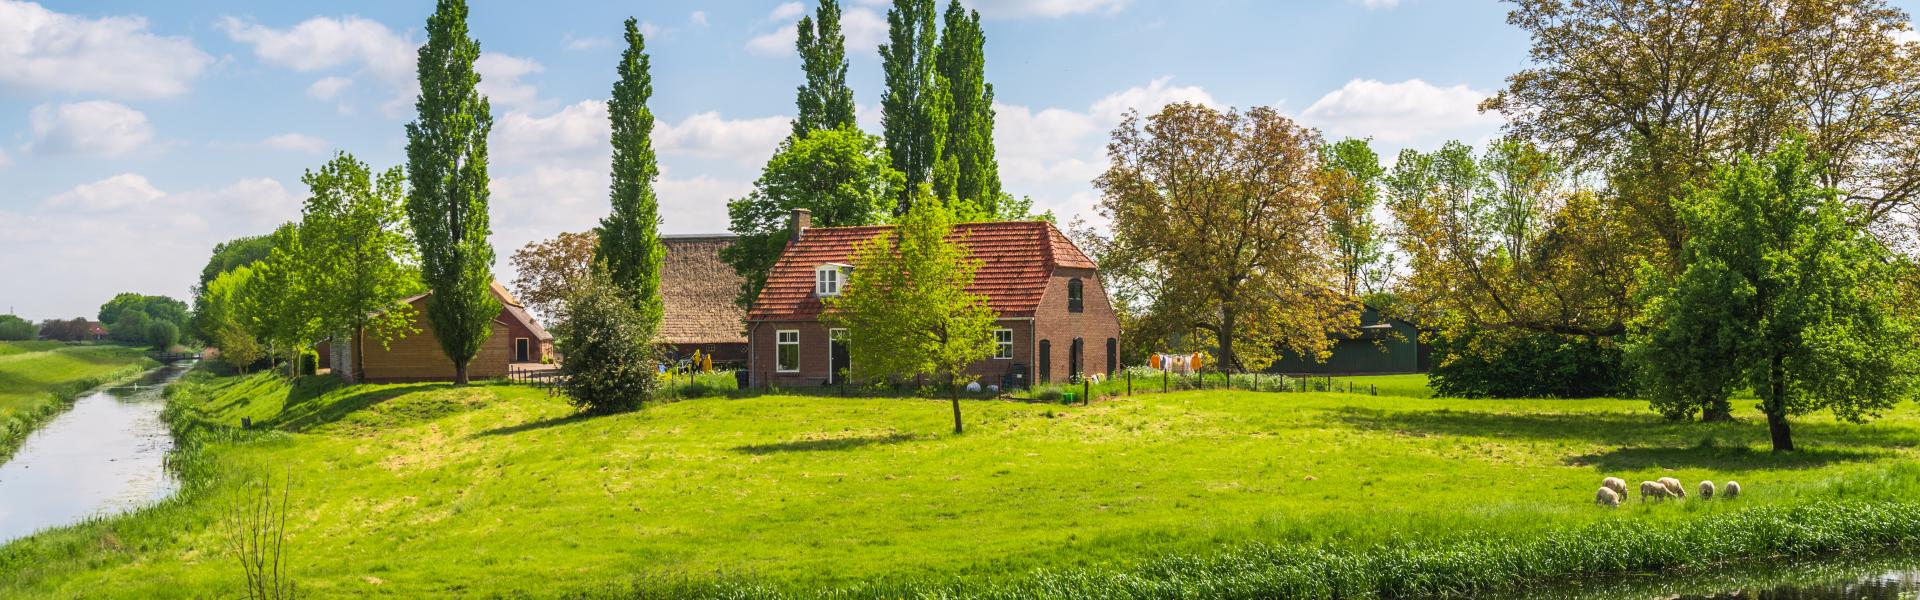 Natural View of a bungalow in netherlands